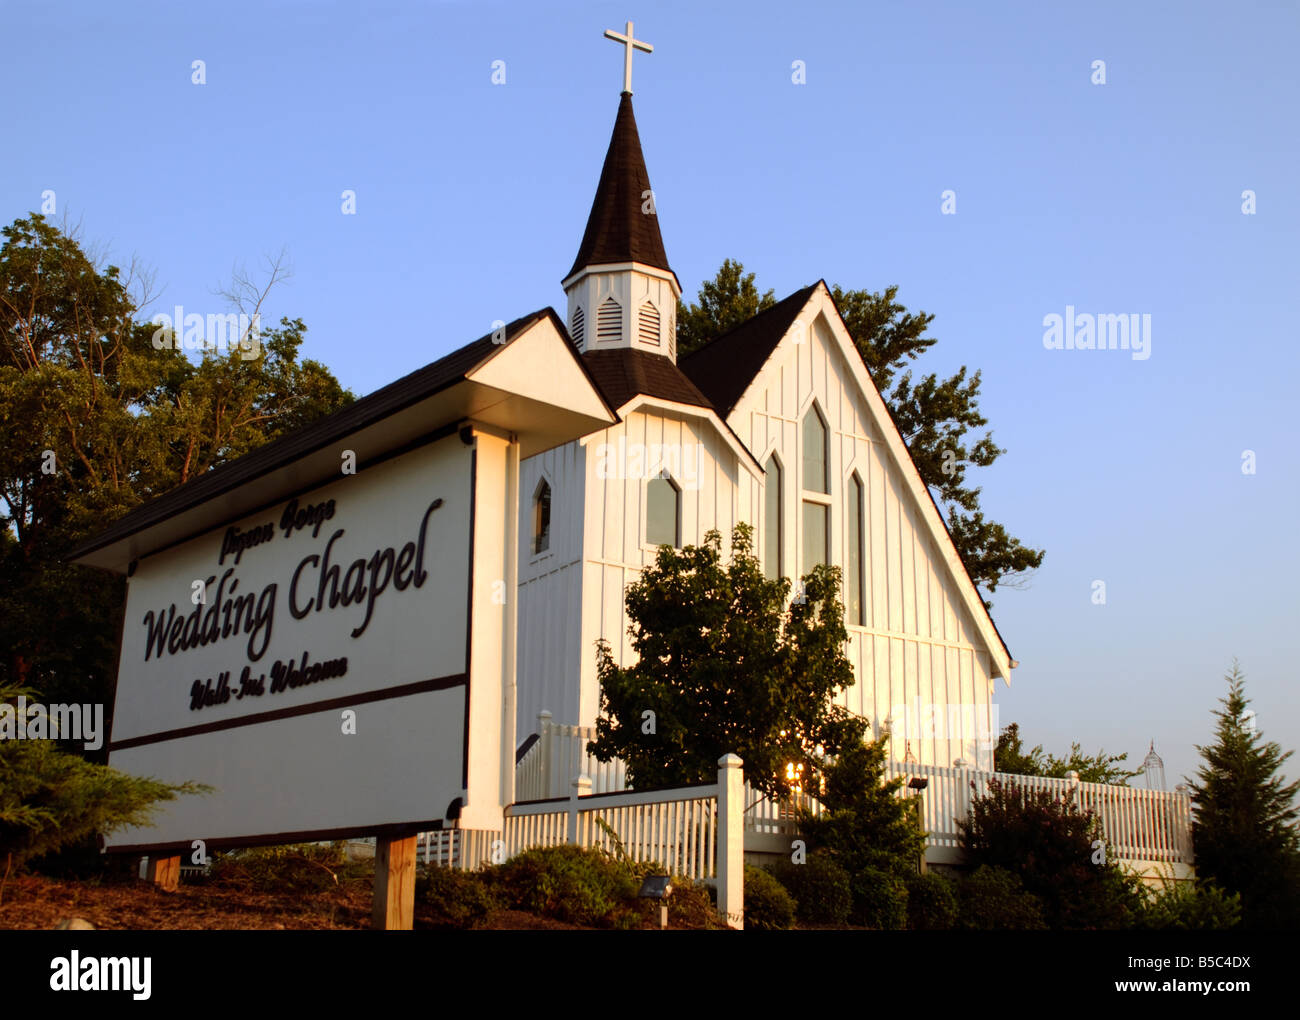 A wedding chapel in Pigeon Tennessee near the Smoky